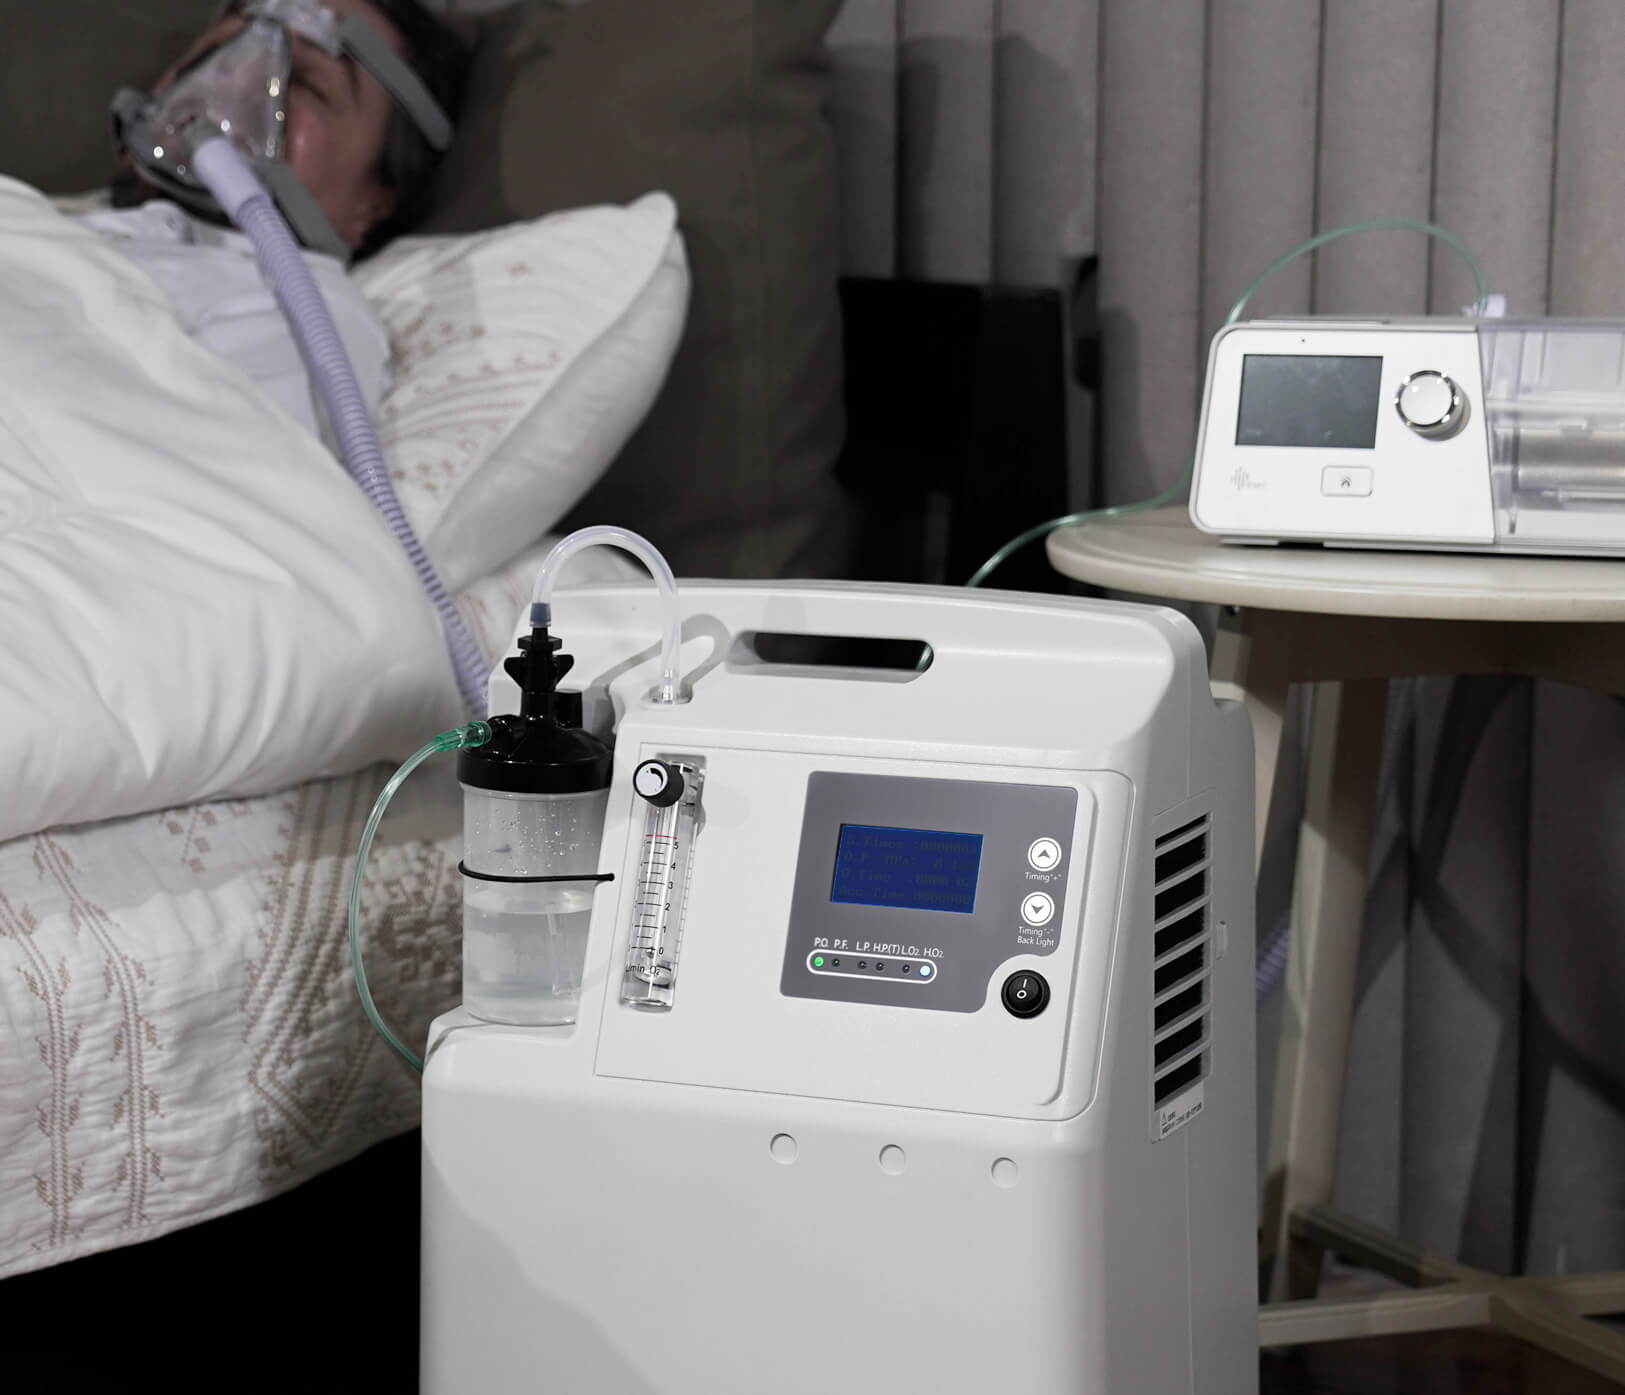 BiPAP Machine and Oxygen Concentrator